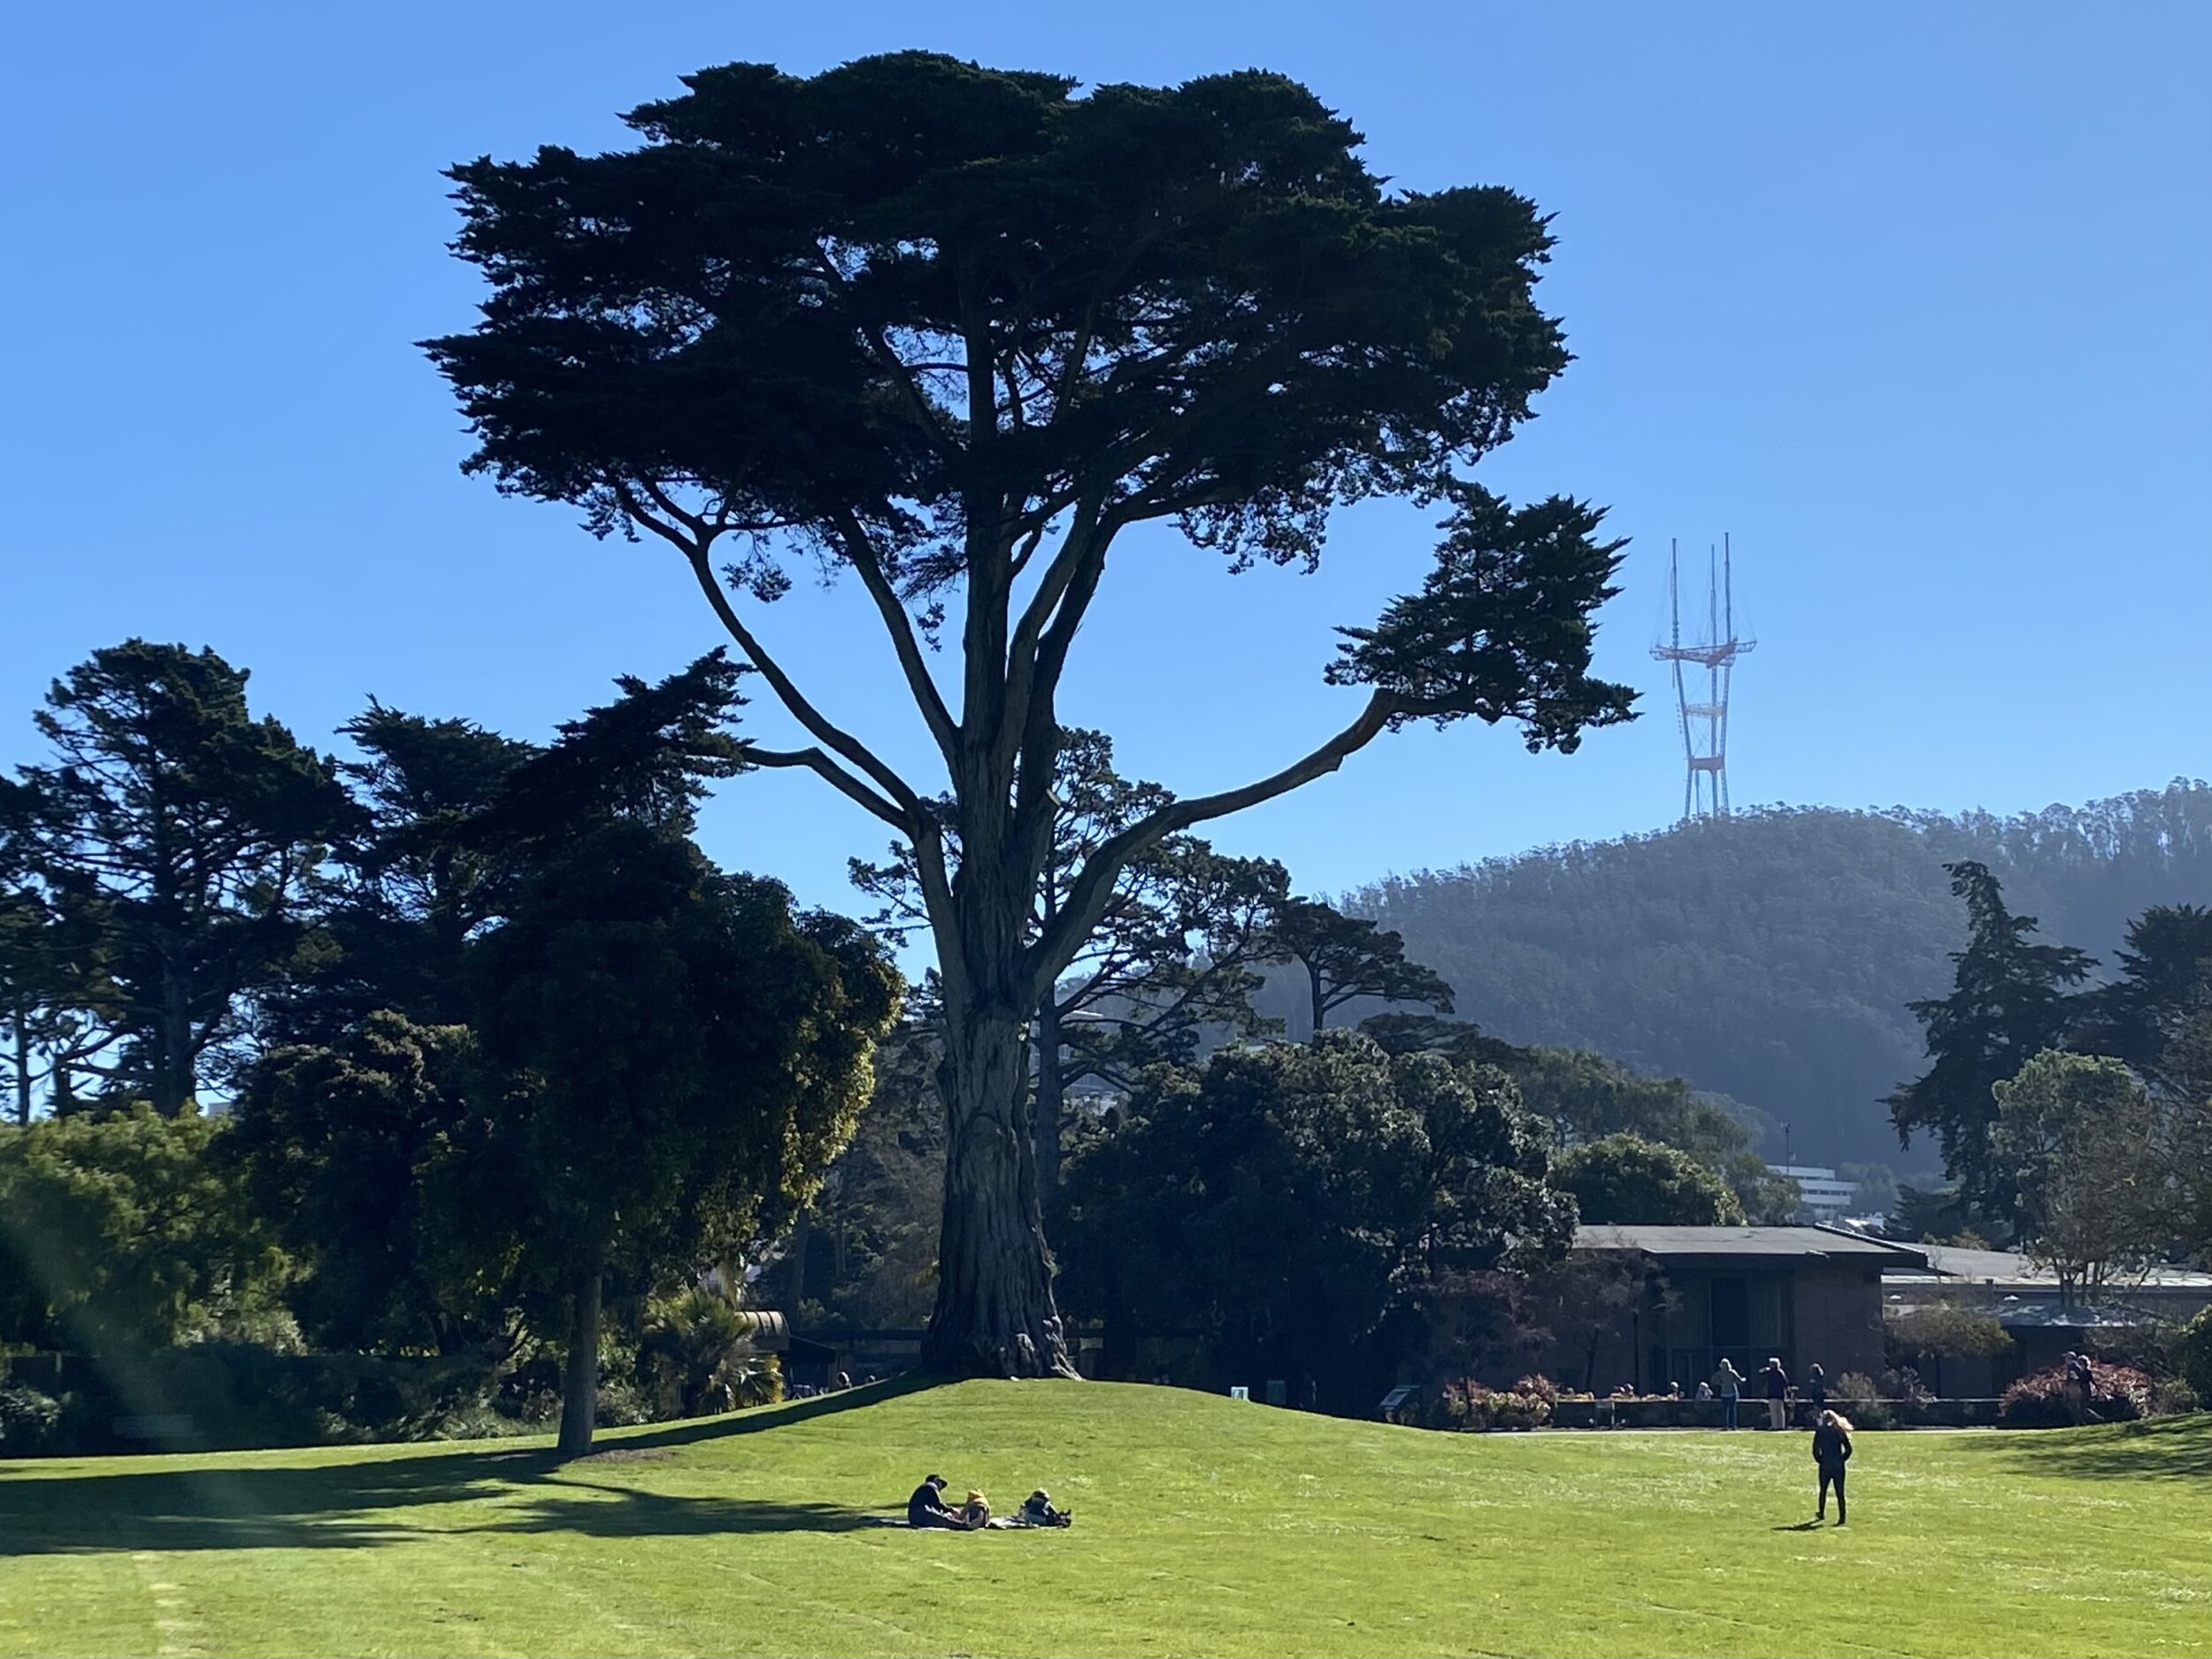 A park with large trees, people relaxing on grass, and a distant hill with a tall tower.